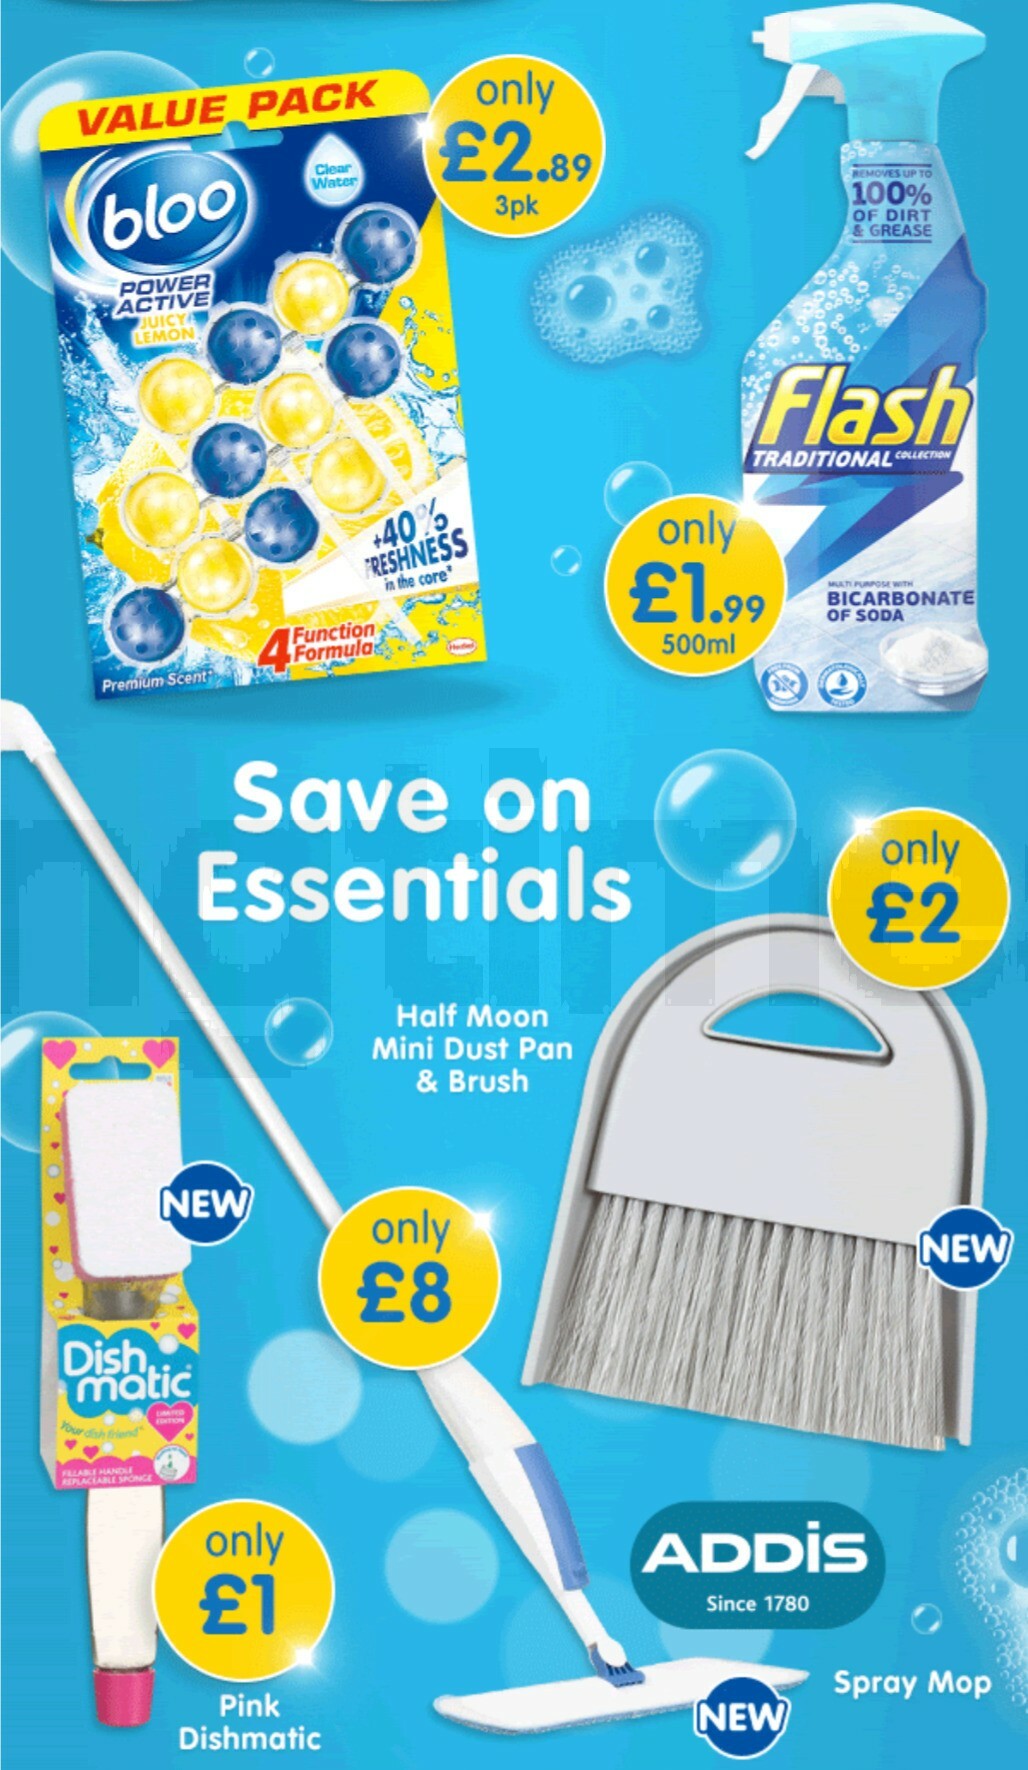 B&M Big Clean Offers from 11 September